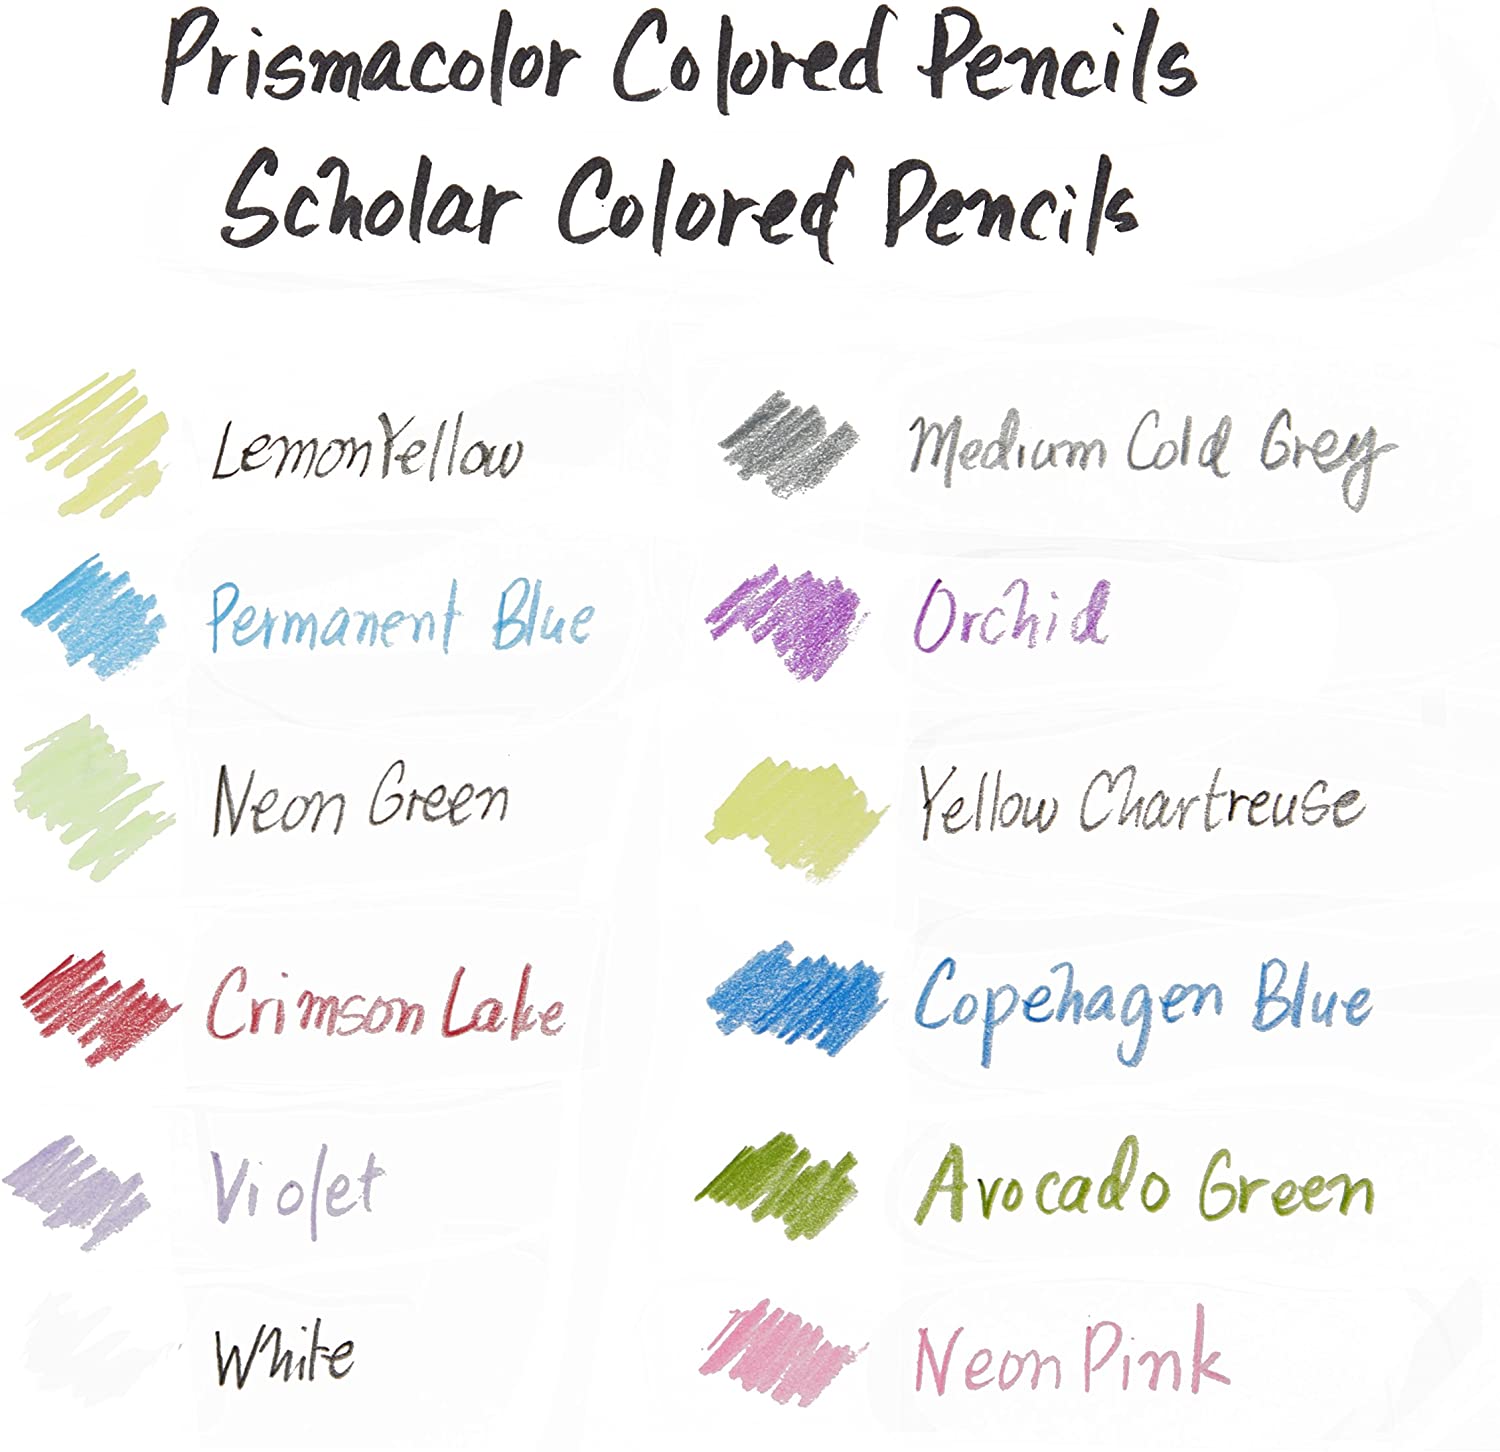 Prismacolor Class Pack Wood Colored Pencil shades